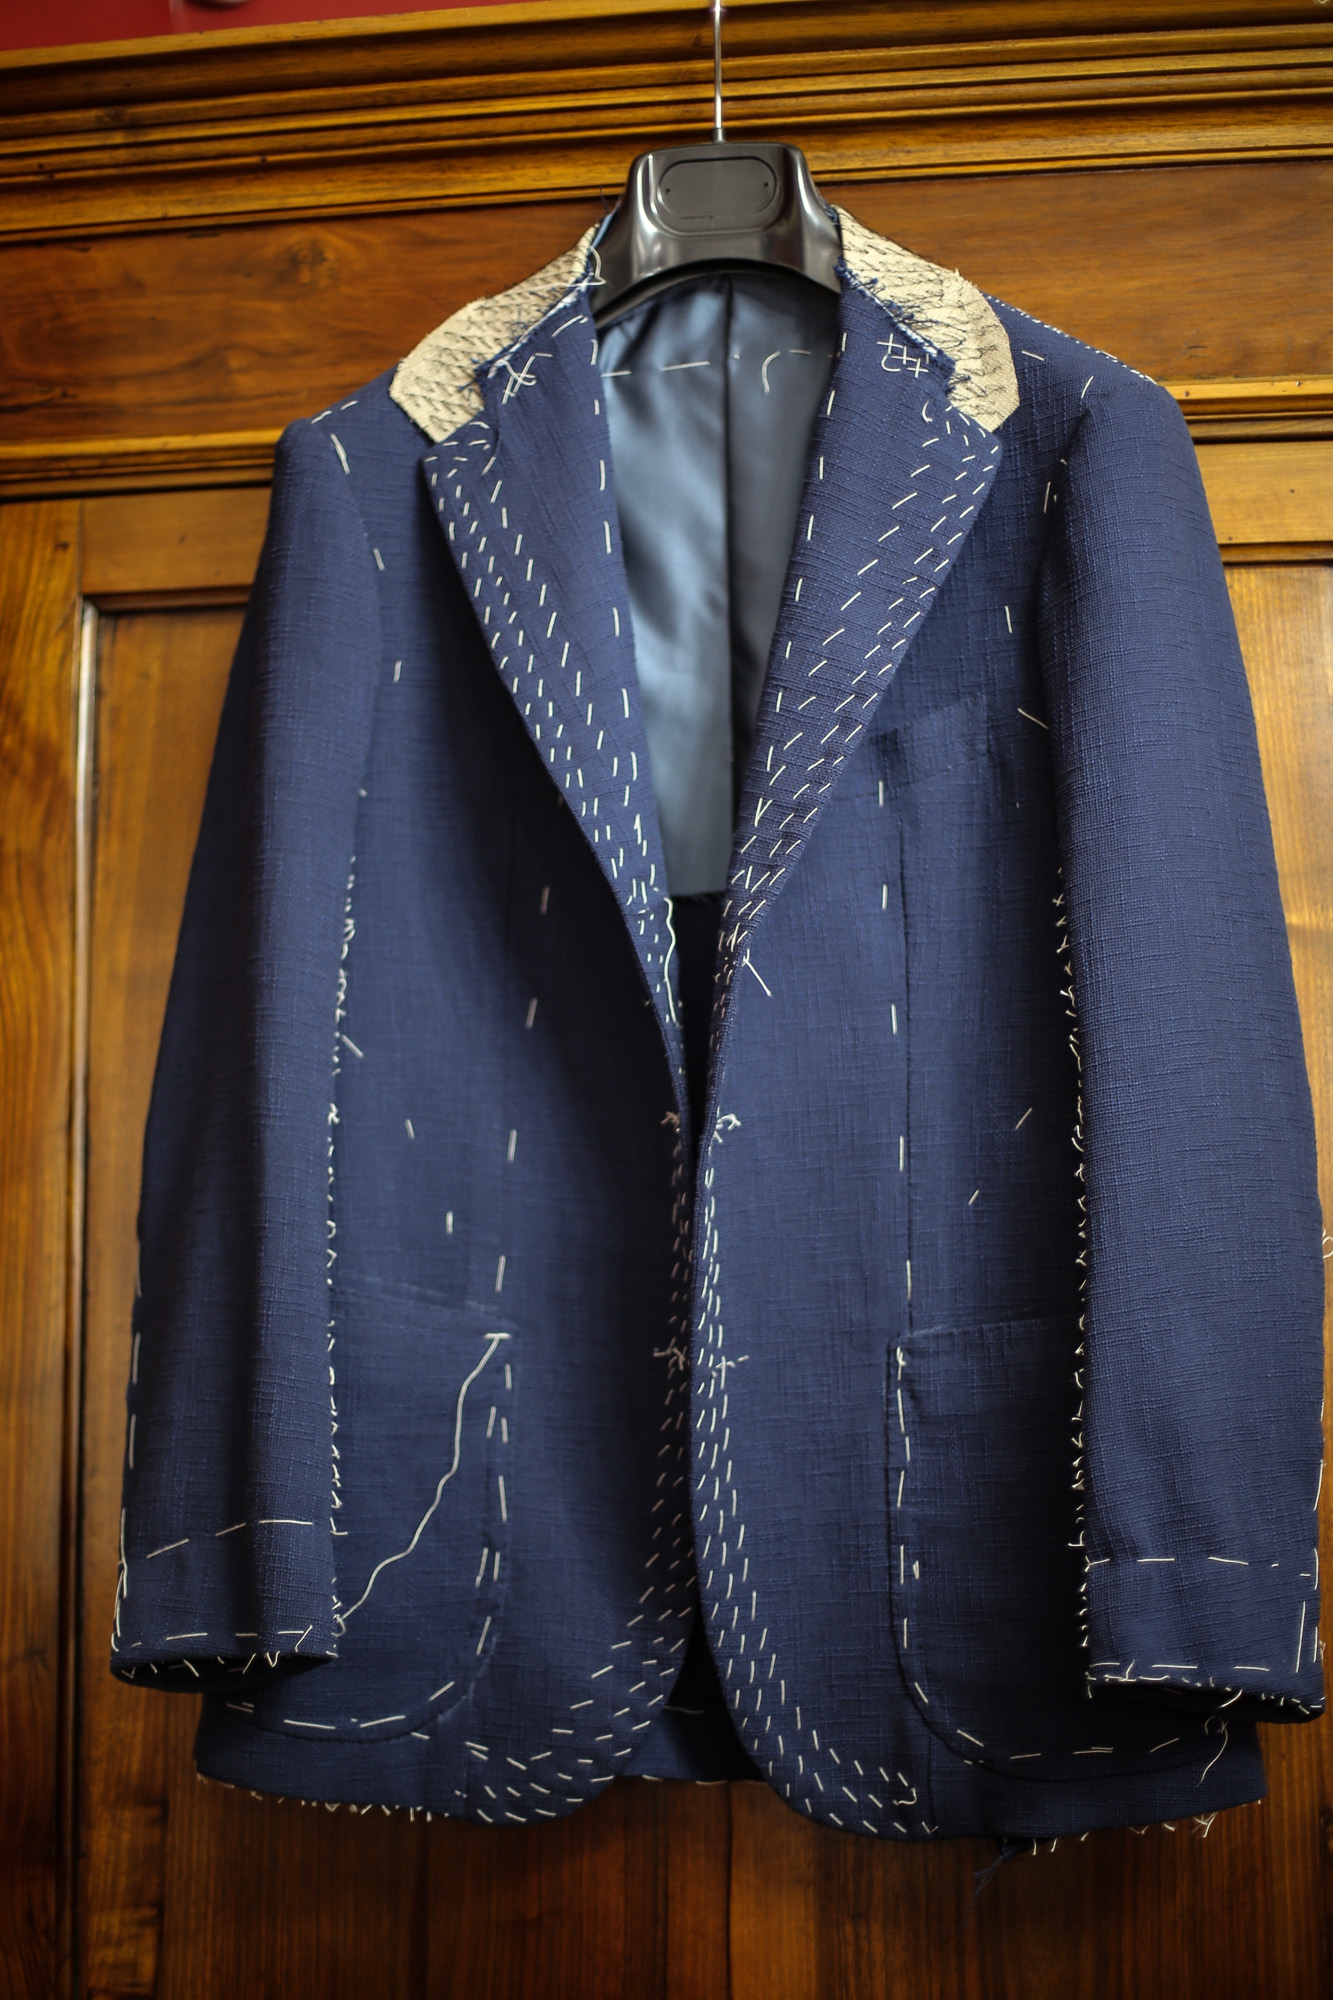 The Neapolitan Chapter: Antonio Panico A one-on-one with one of the godfathers of the Neapolitan jacket